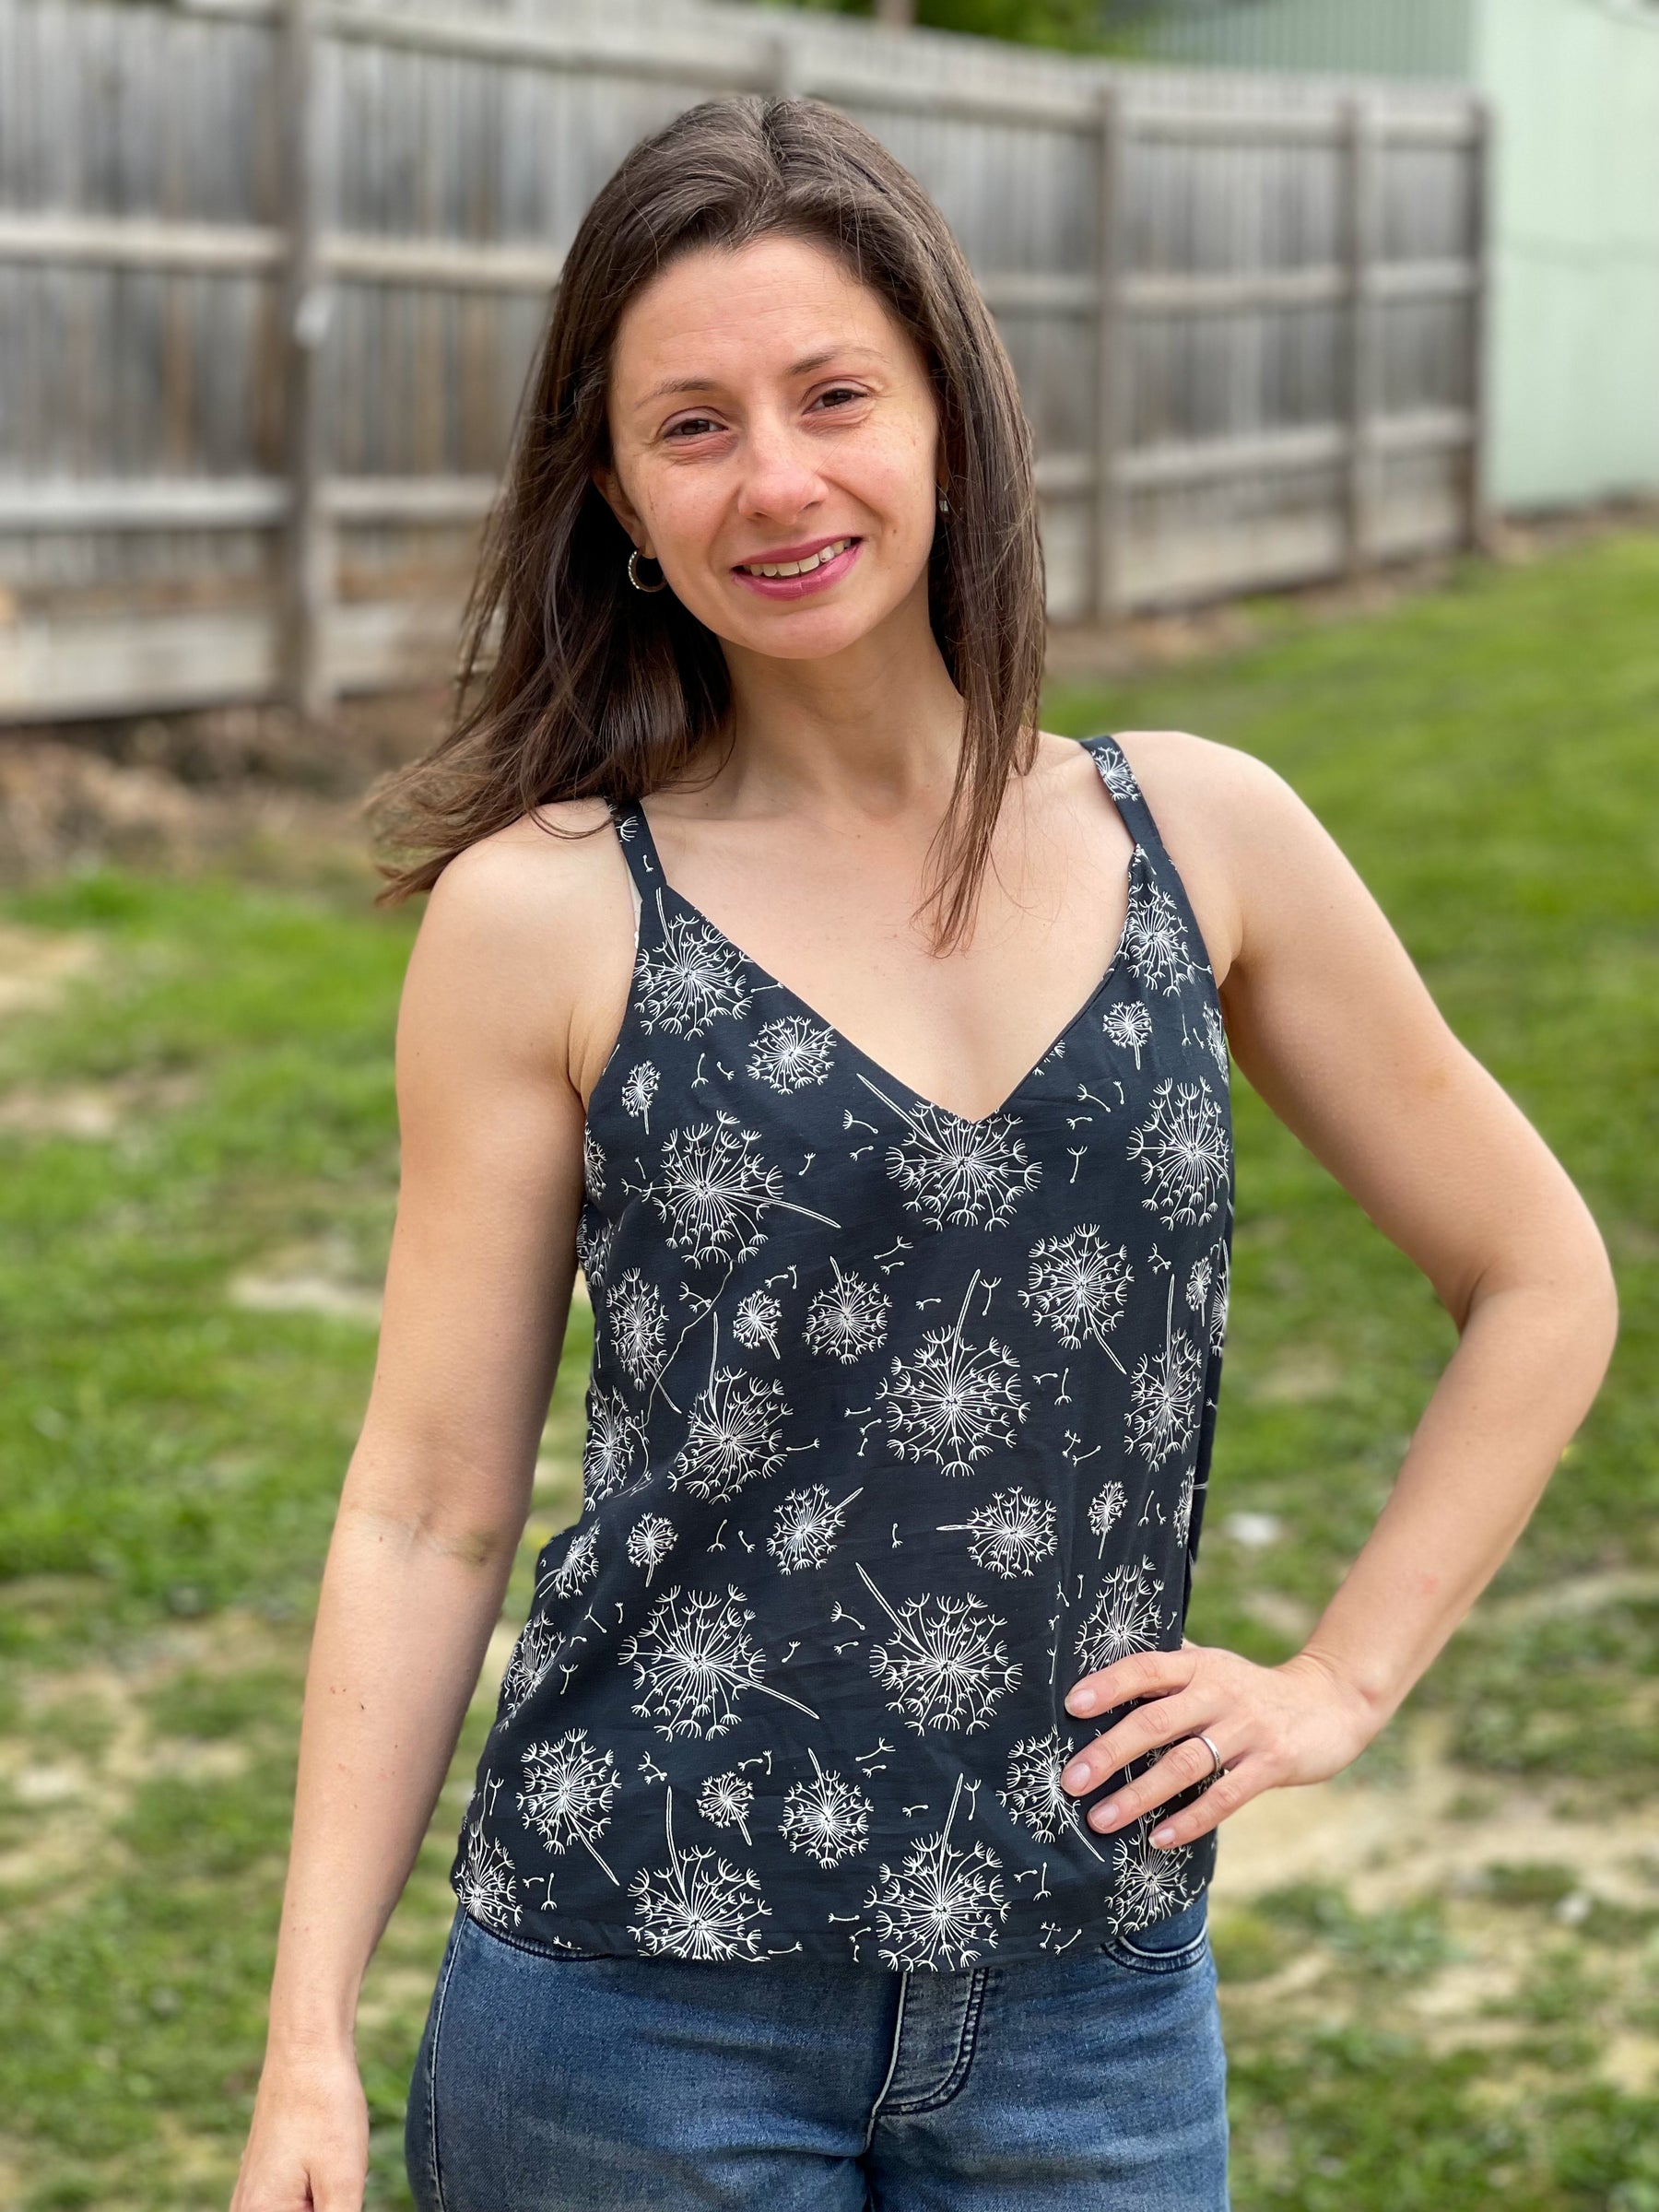 Classic Camisole Top & Dress Pattern